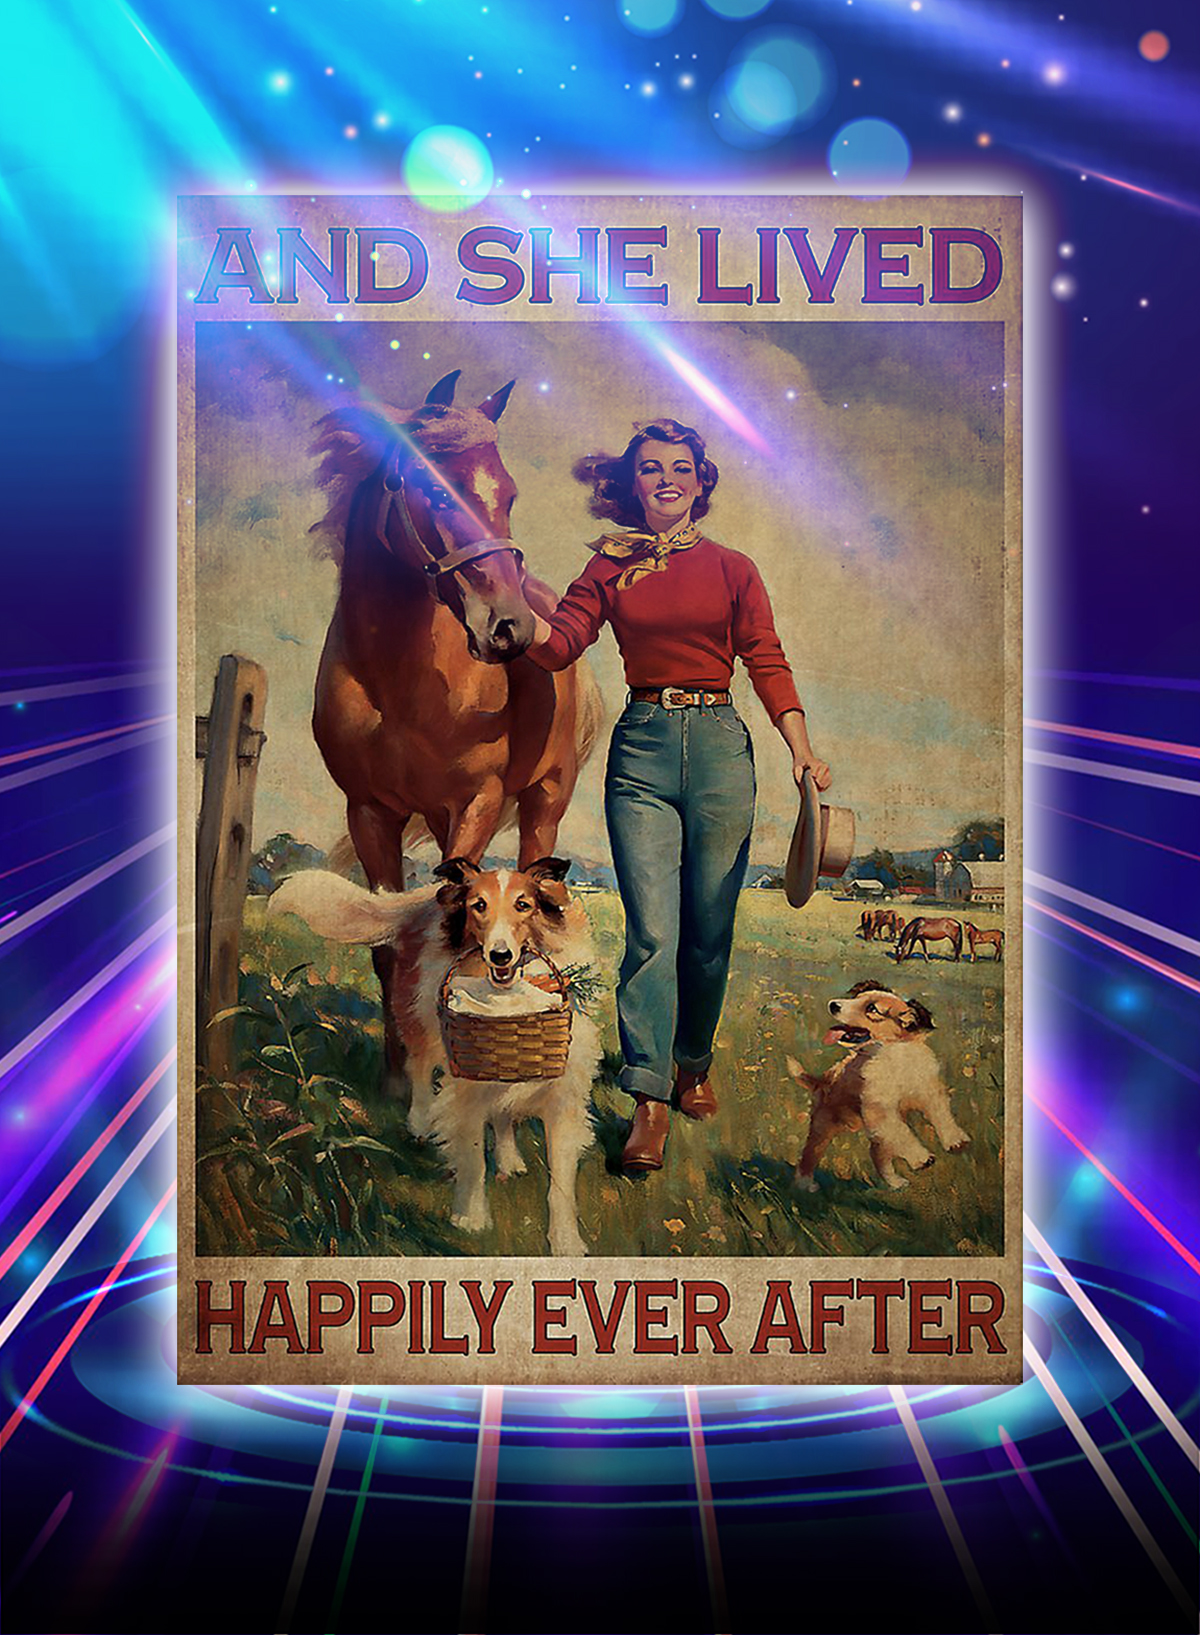 And she lived happily ever after horse and dog poster - A1